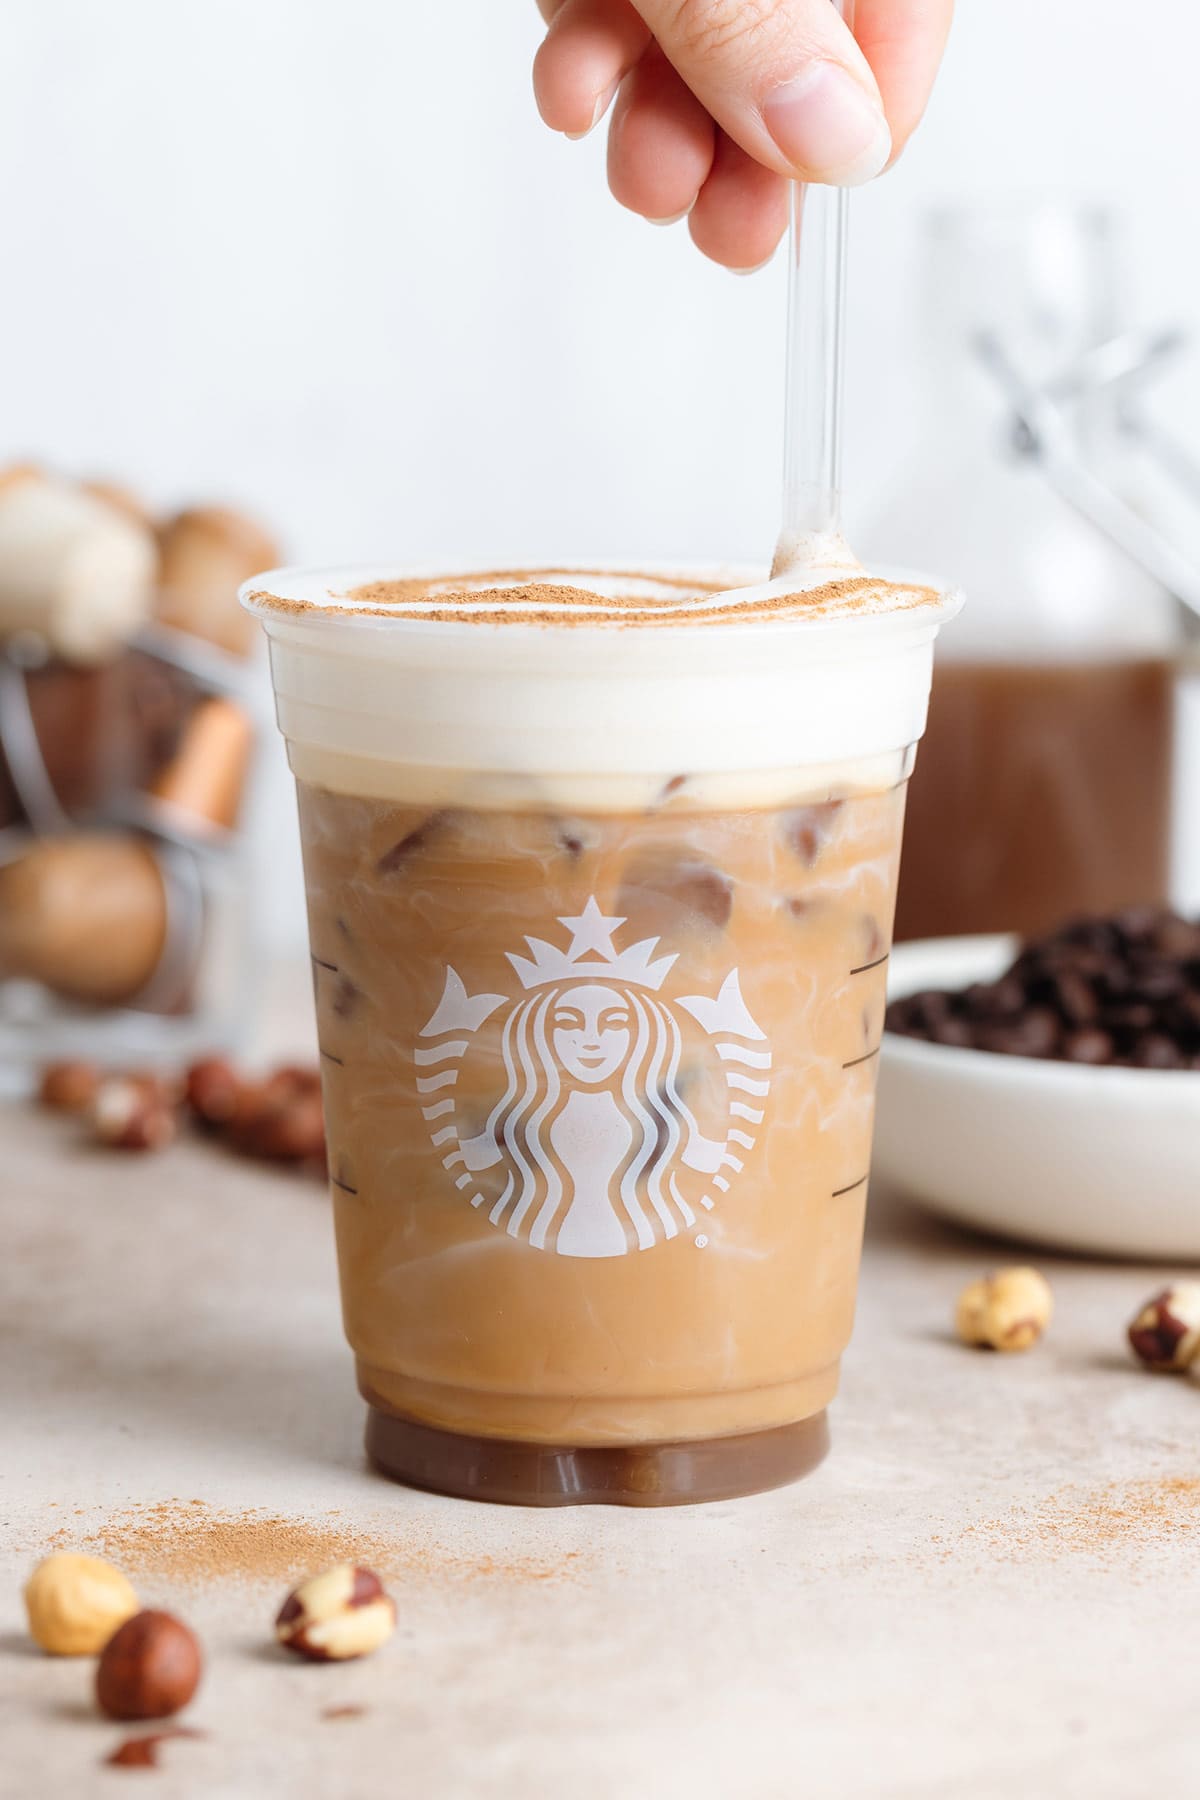 A plastic Starbucks cup with iced latte with frothy milk and a sprinkle of cinnamon with a hand stirring it using a glass straw.